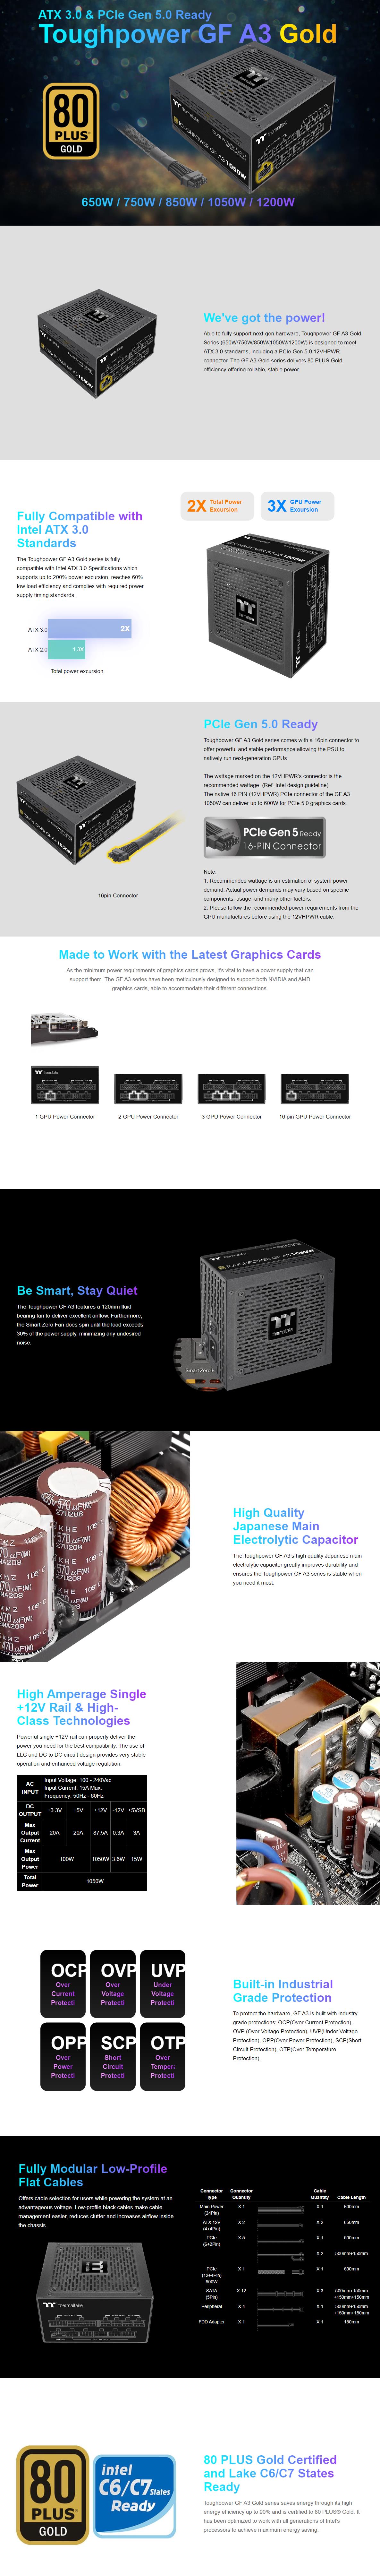 A large marketing image providing additional information about the product Thermaltake Toughpower GF A3 - 850W 80PLUS Gold PCIe 5.0 ATX Modular PSU - Additional alt info not provided